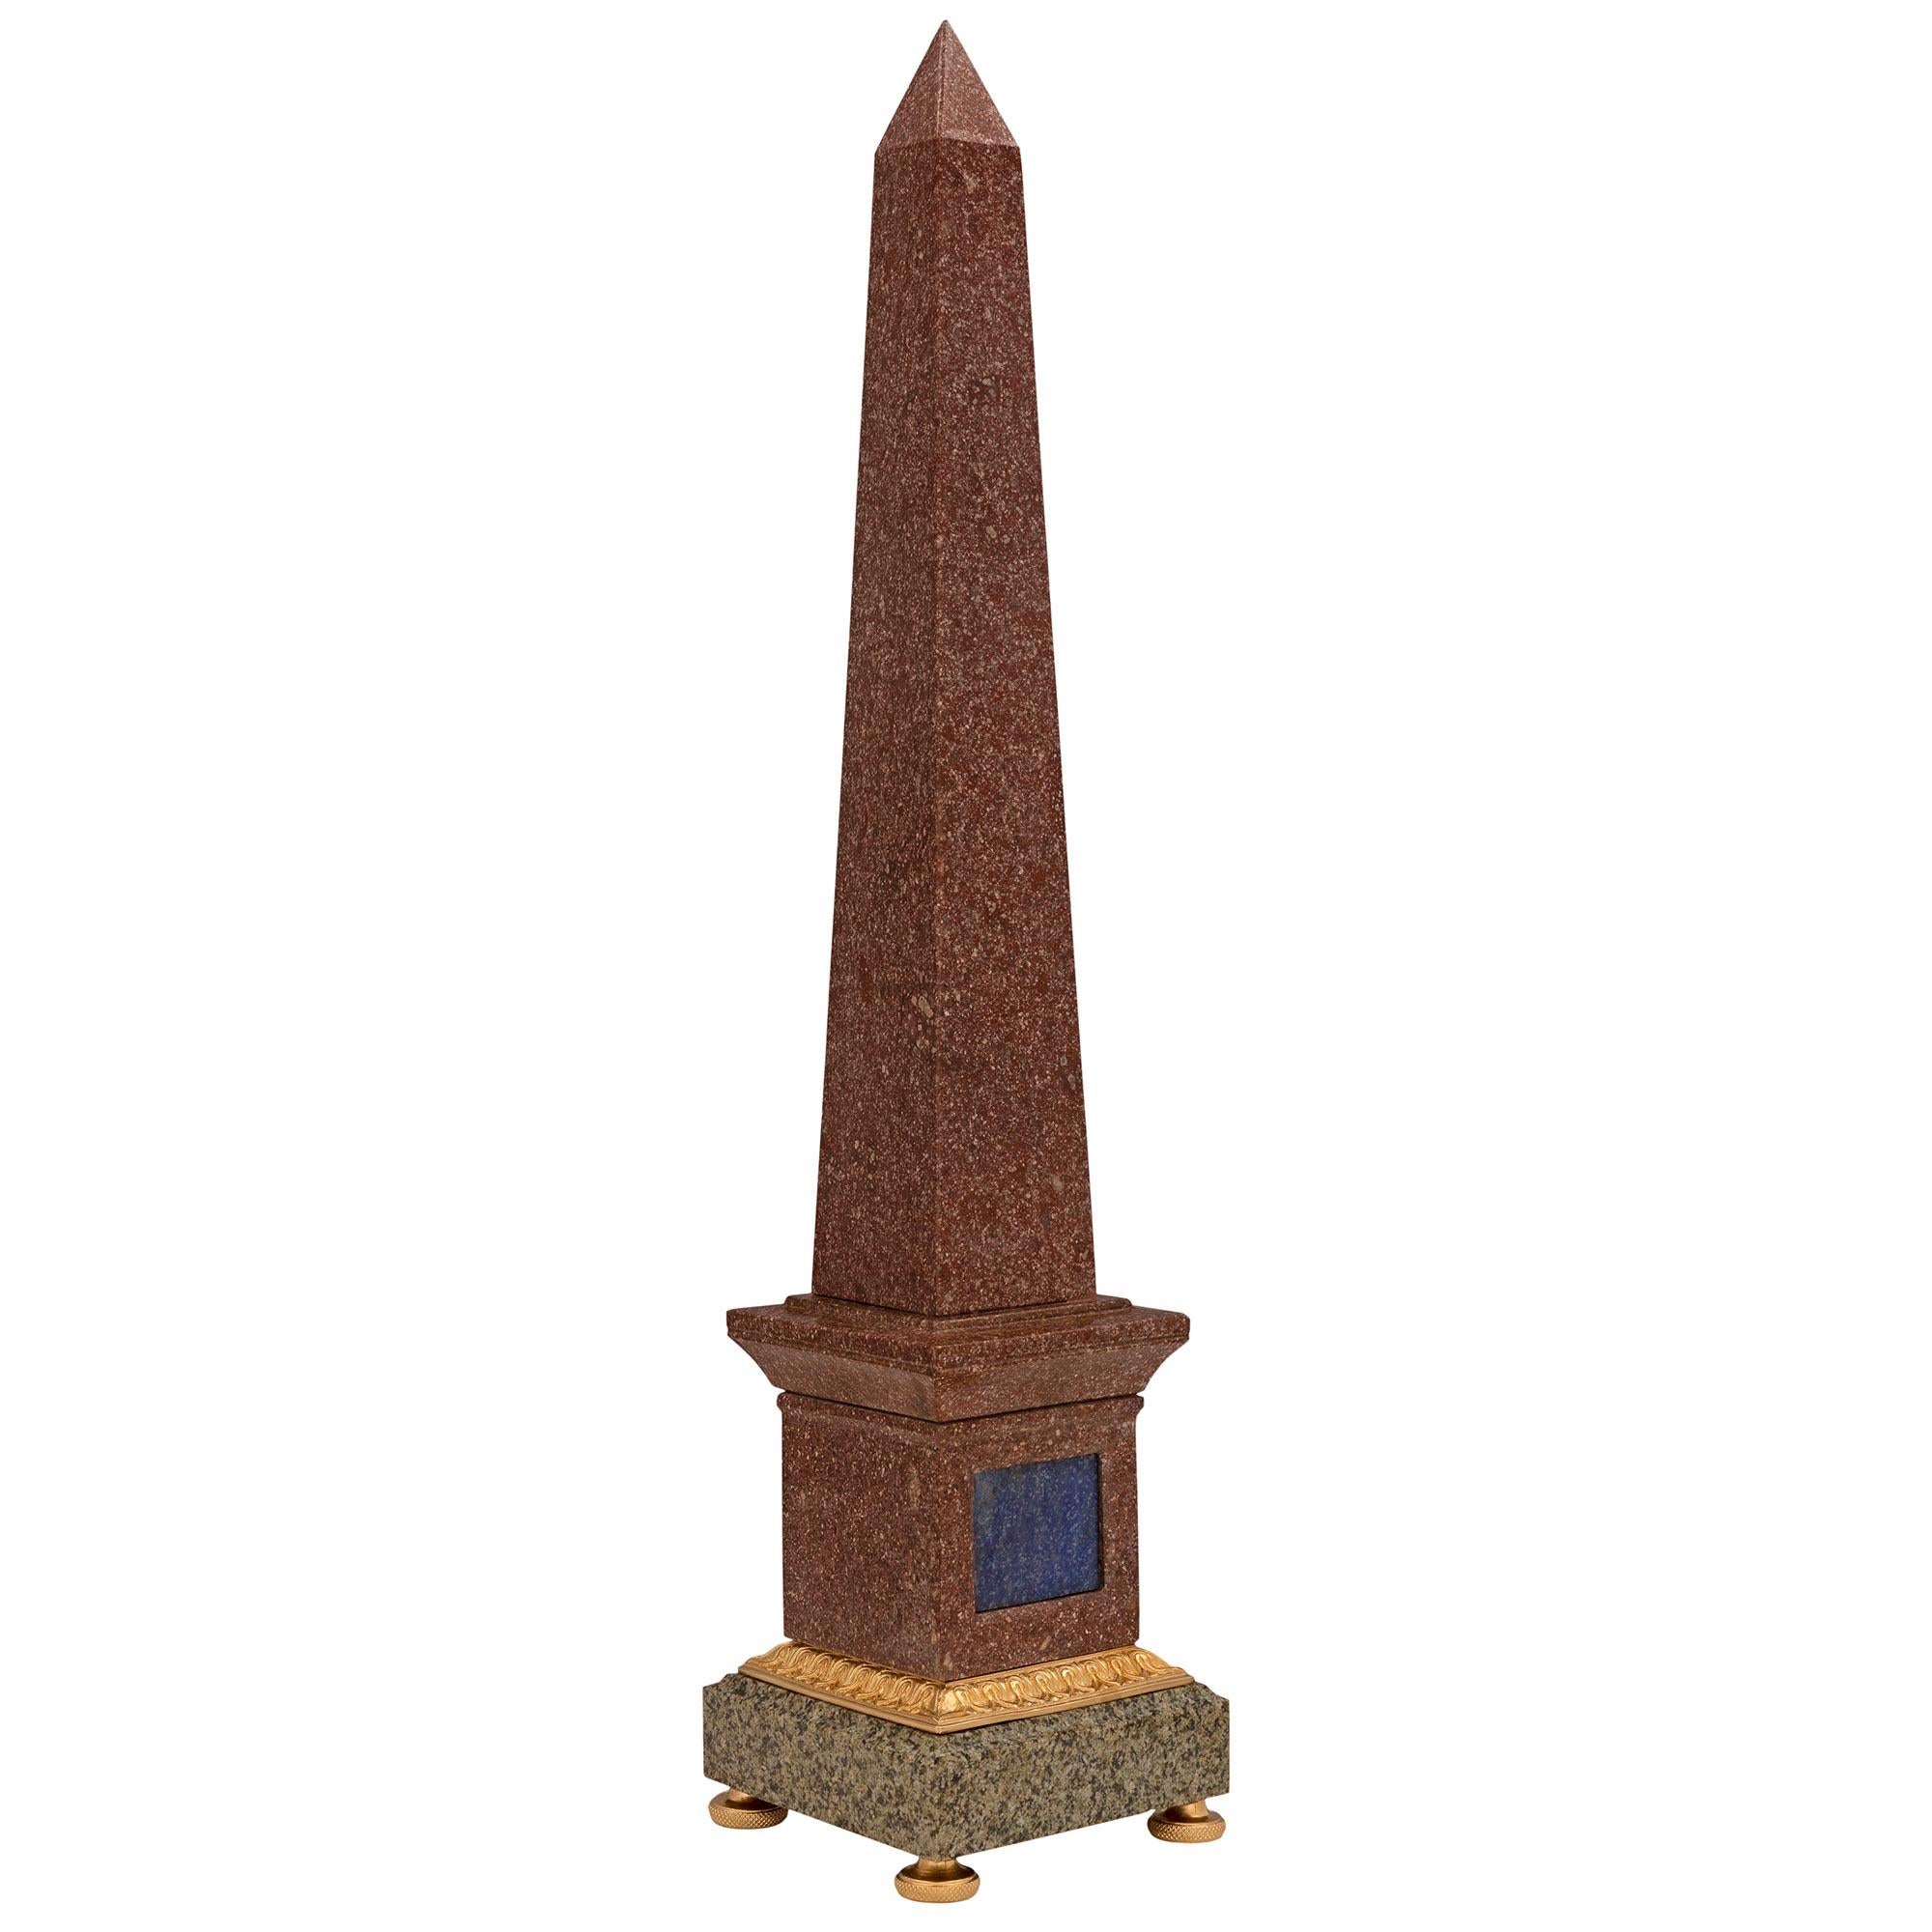 An impressive pair of French 19th century neo-classical st. Porphyry, granite, Lapis Lazuli and ormolu obelisks. Each obelisk is raised by fine ormolu feet below the square green granite base with a mottled border. Above a richly chased wrap around